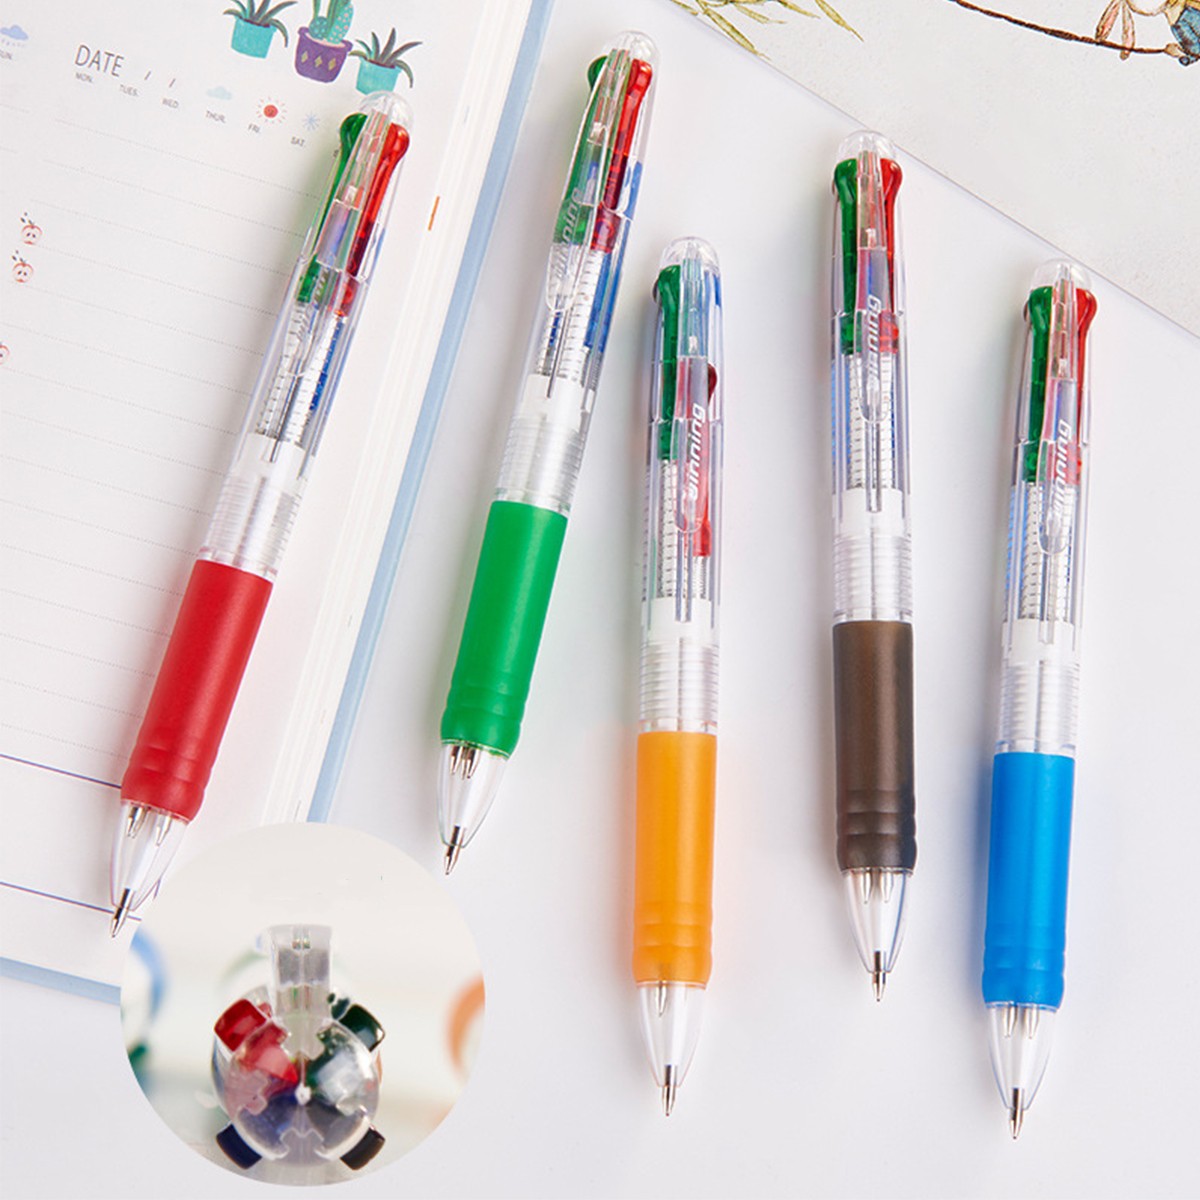 5PCS Funny Nurses Pens Set Reliable Cute Letter Printed Ballpoint Pen for  School Stationery or Diary Items 